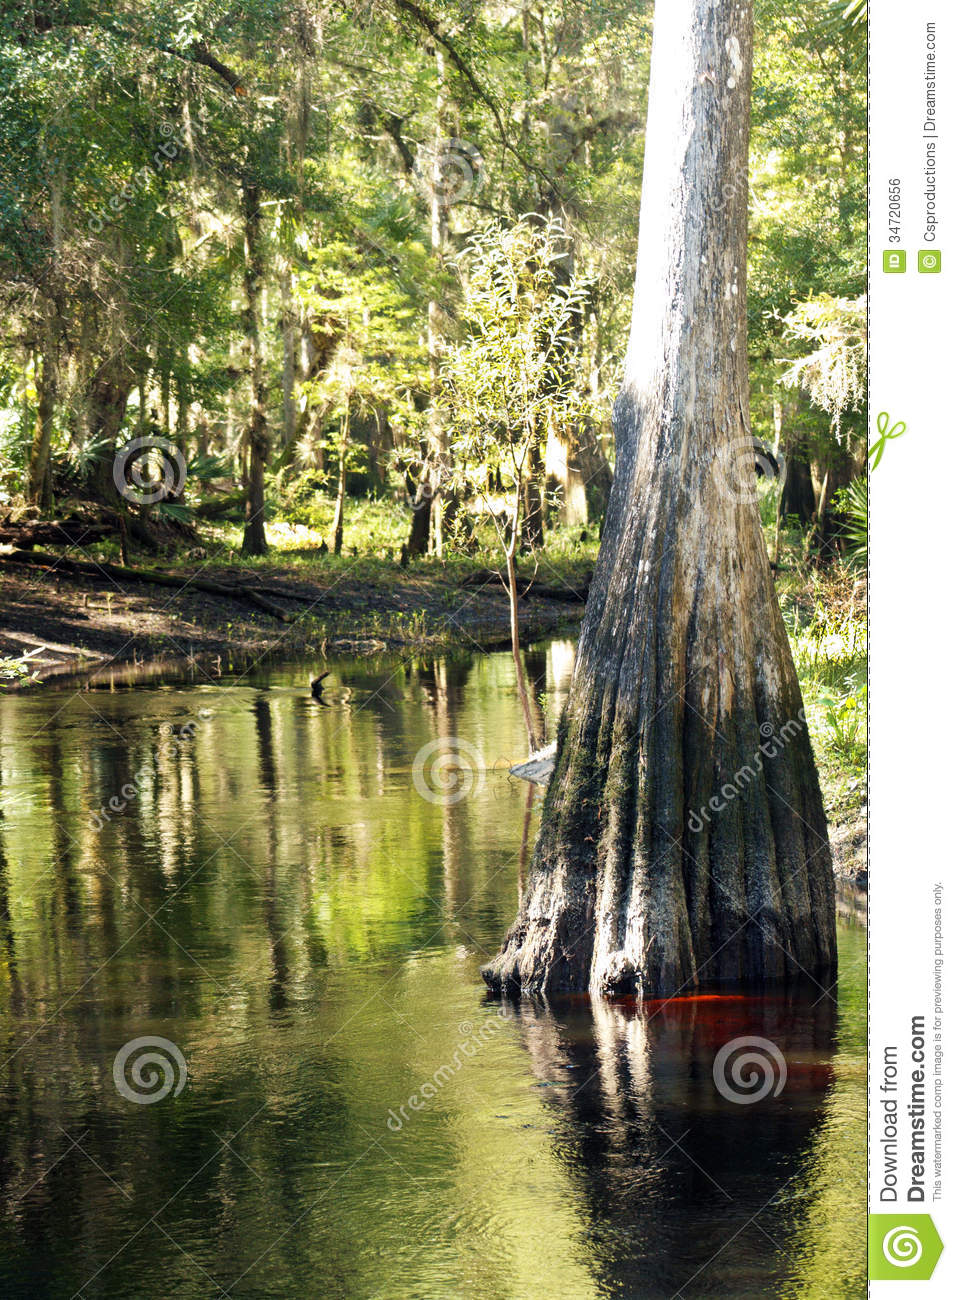 Cypress Tree In A Tropical River  1  Royalty Free Stock Image   Image